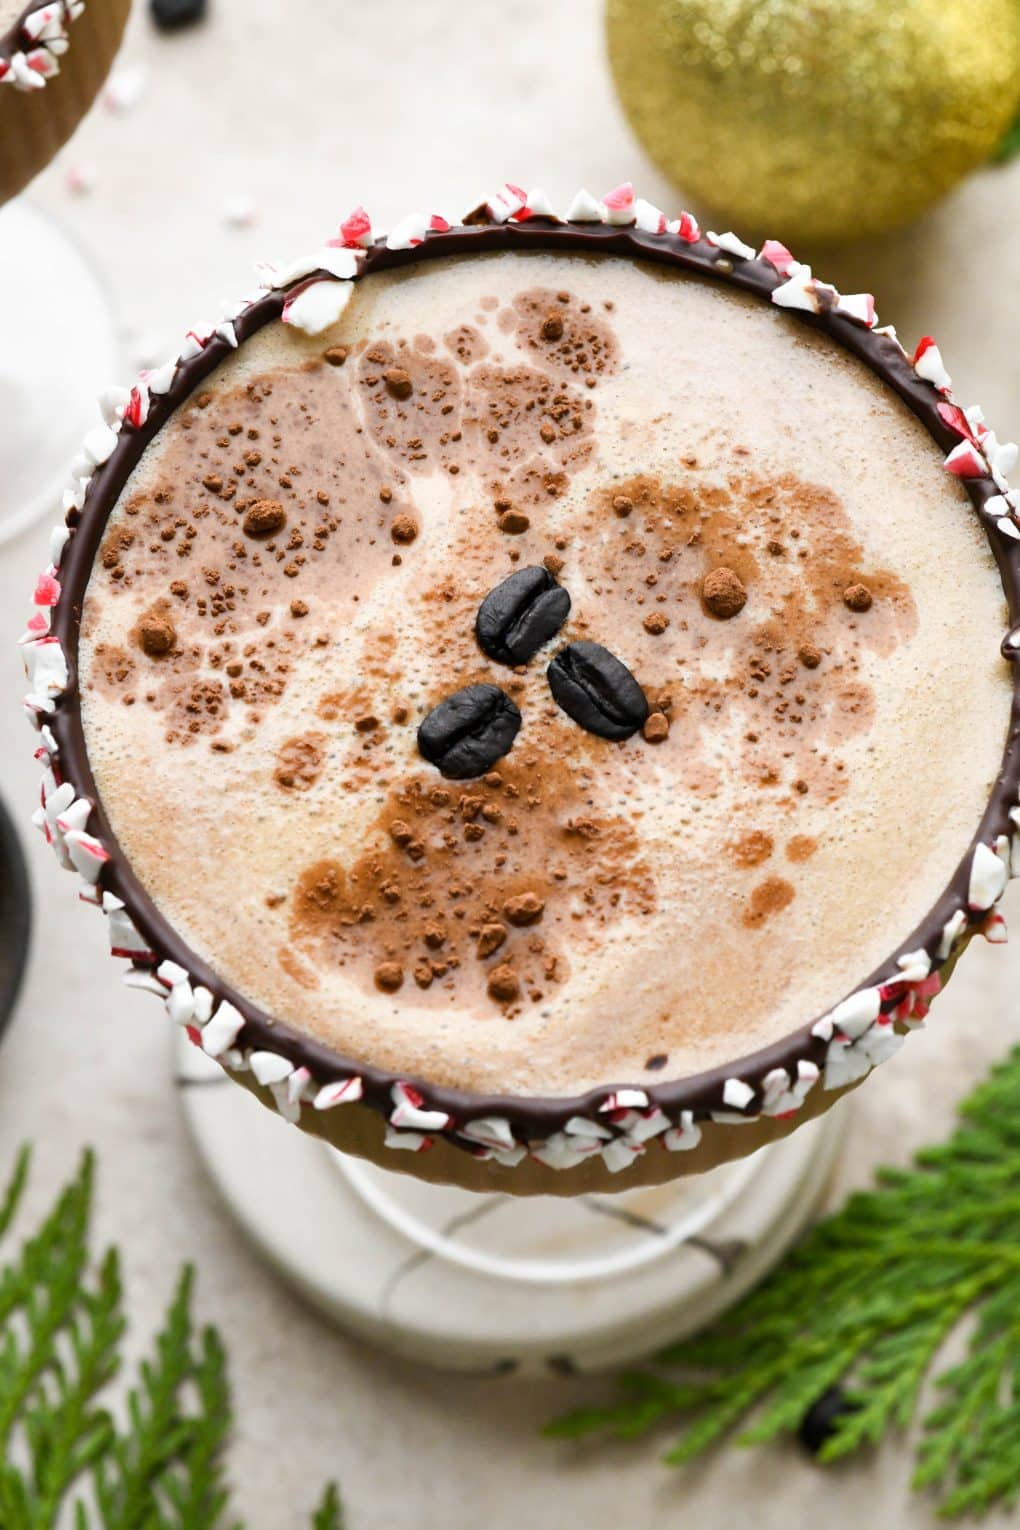 Overhead shot to show the top of a peppermint mocha espresso martini garnished with cocoa powder and coffee beans